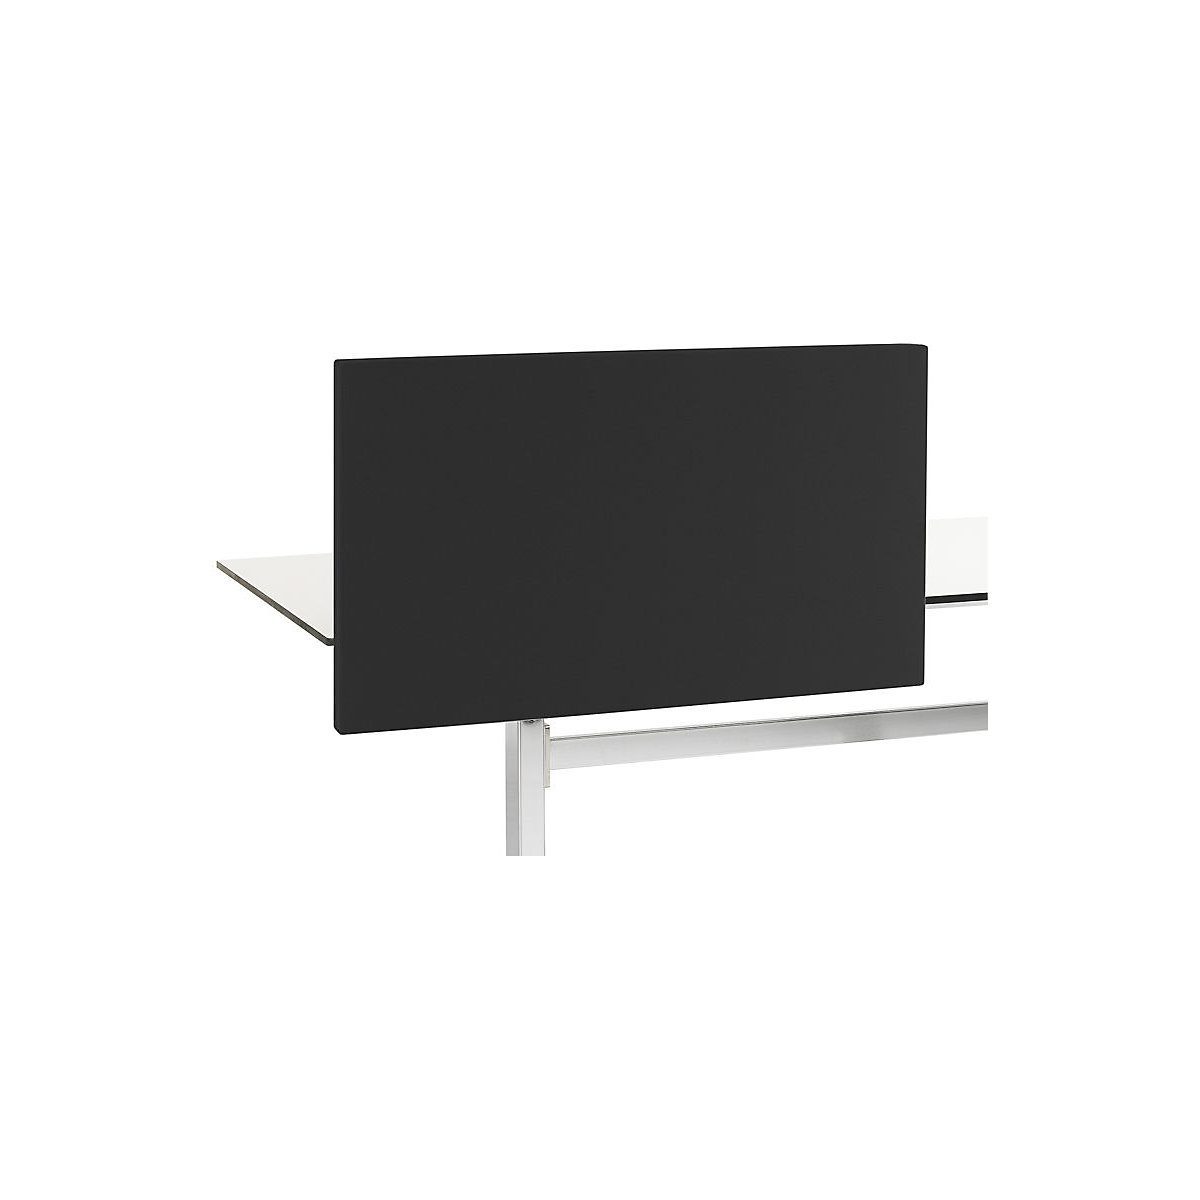 Standard acoustic desk partition with straight corners, HxW 650 x 1400 mm, fabric, black-1